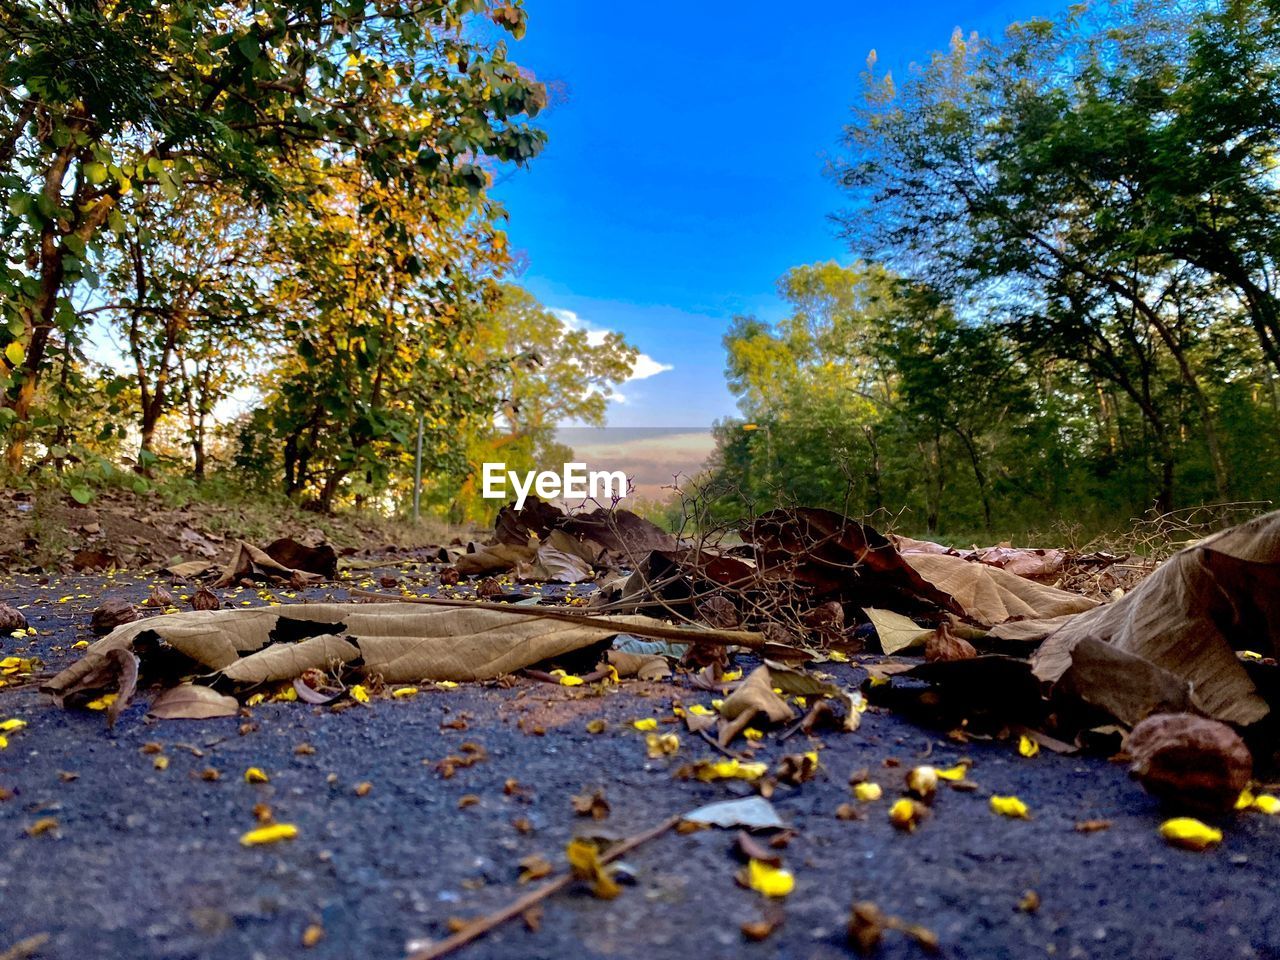 SURFACE LEVEL OF FALLEN LEAVES ON GROUND AGAINST SKY